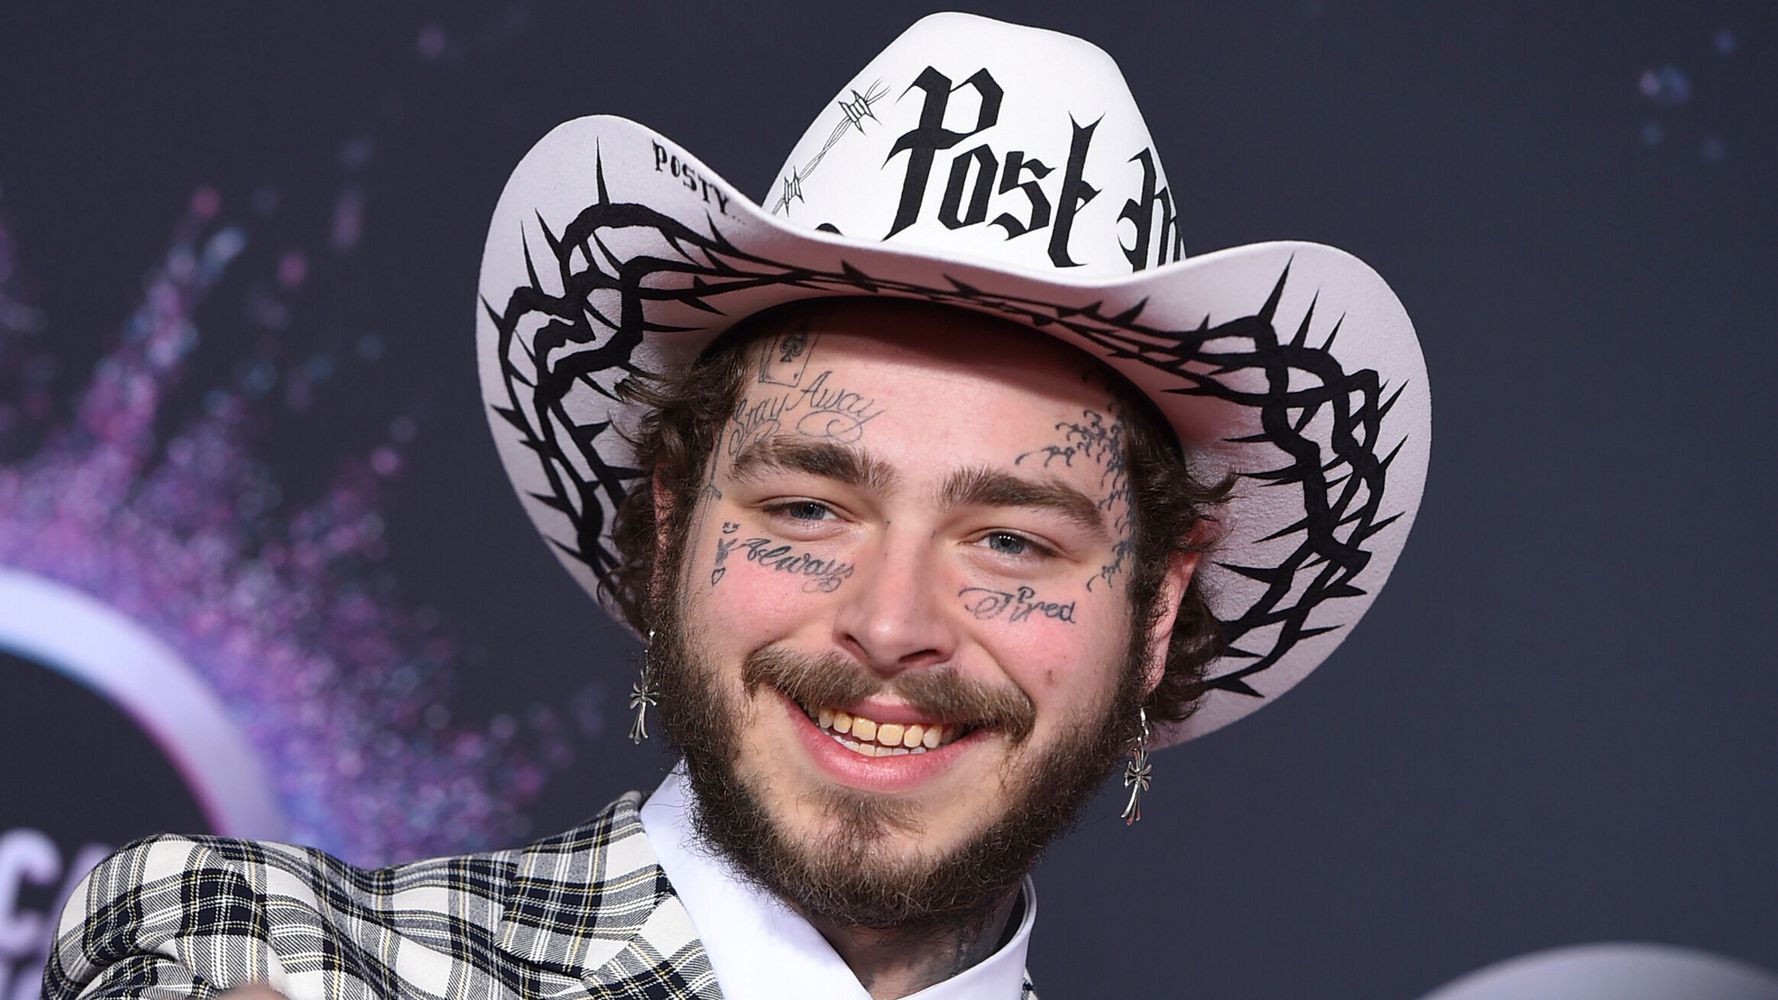 Post Malone Is Still the Cowboy King of the Red Carpet